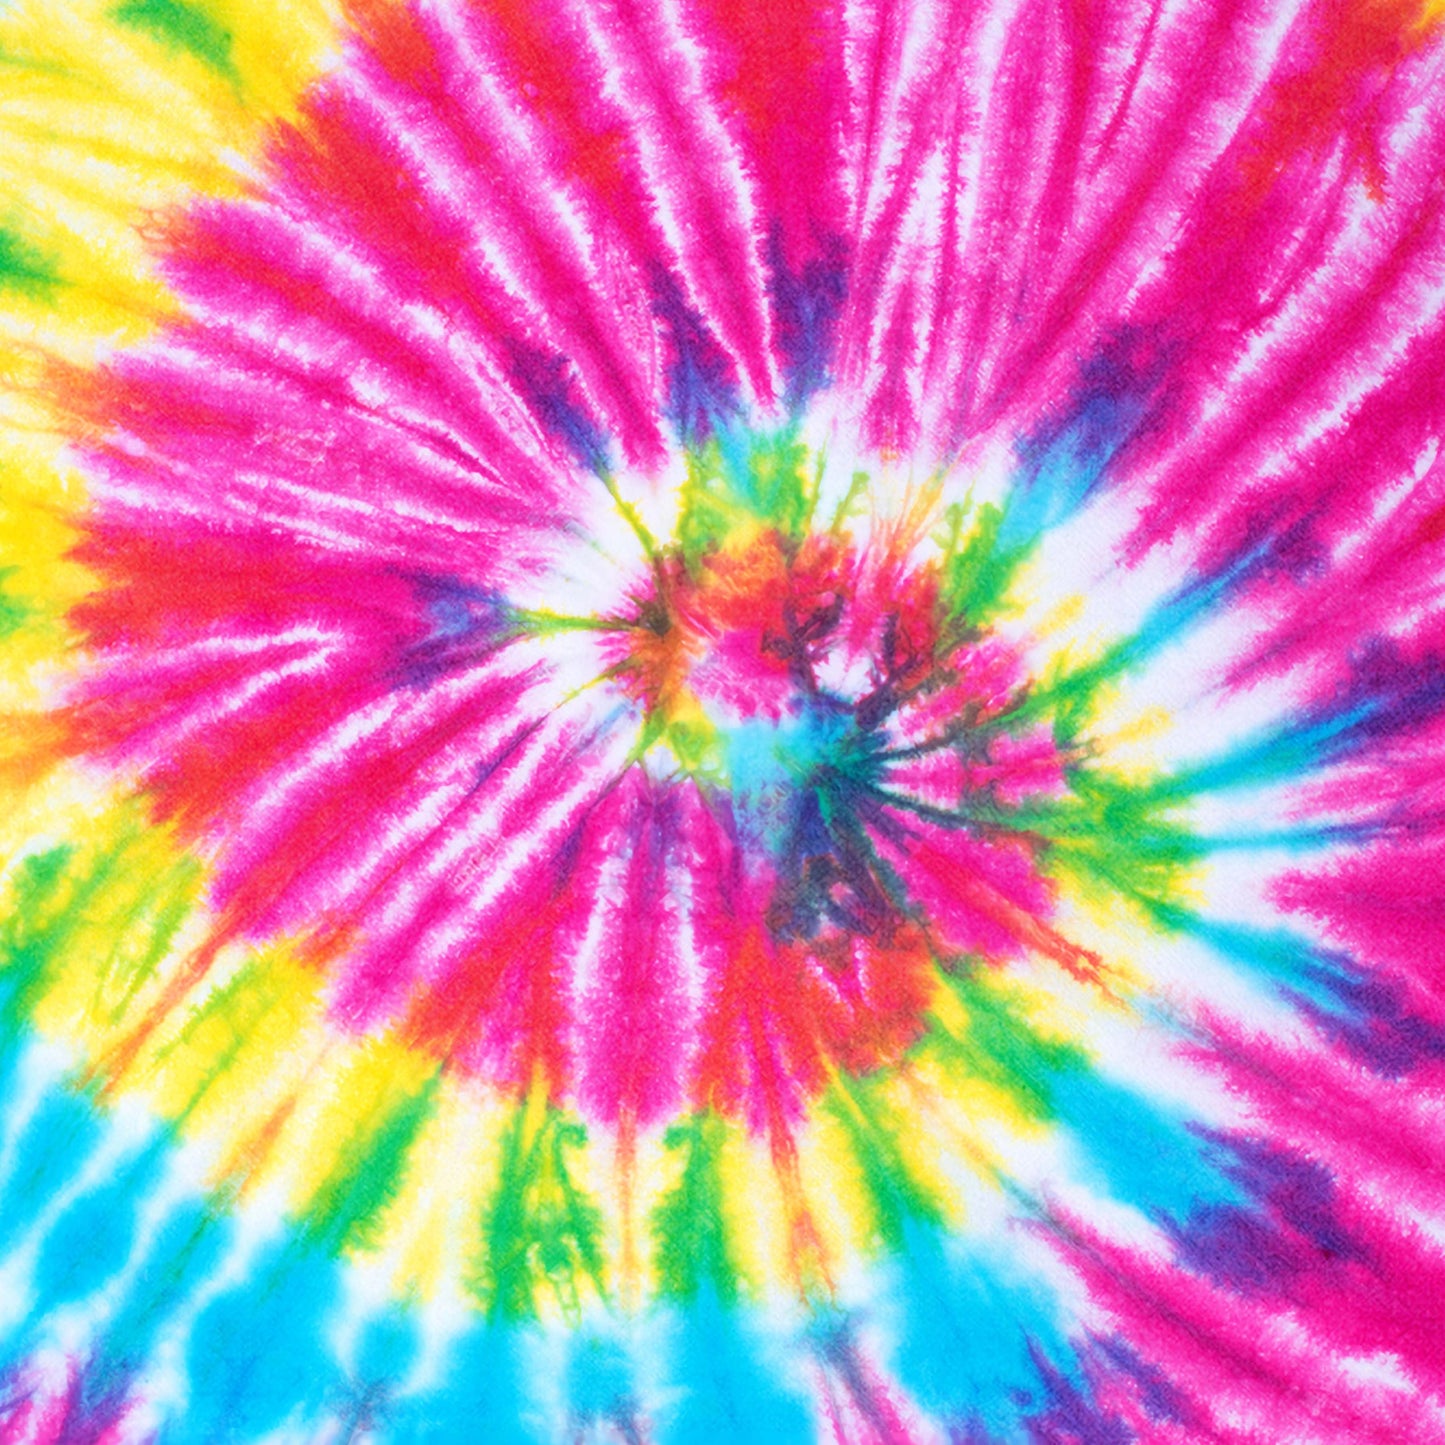 Very Colorful Tie Dye 017